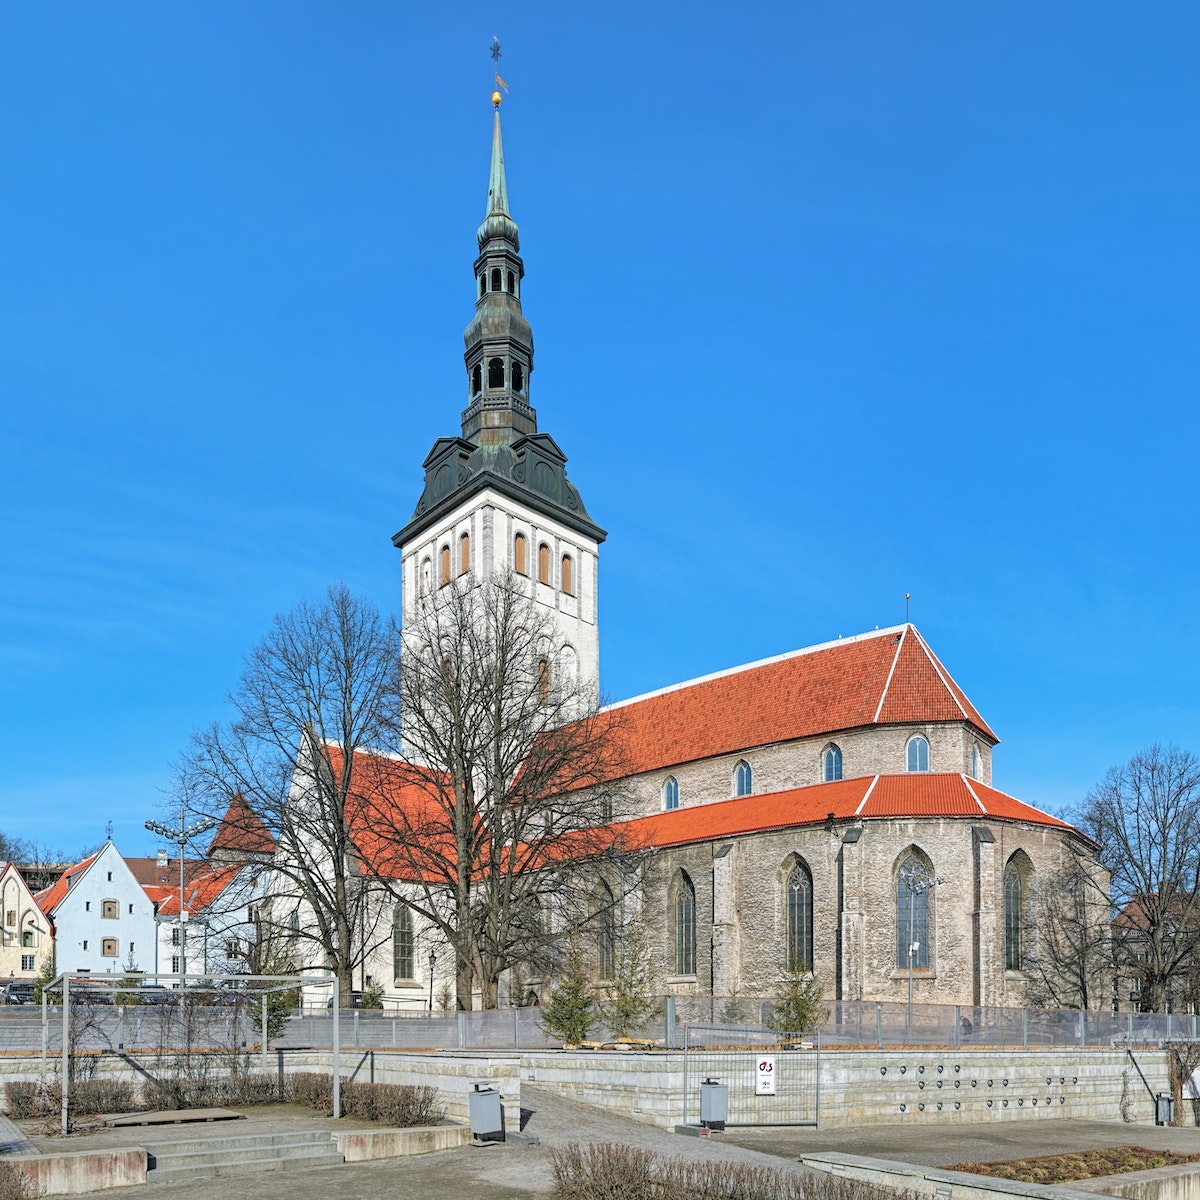 Tallinn, Estonia - March 19, 2015: St. Nicholas Church (Niguliste kirik) and cupola of Alexander Nevsky Cathedral. The St. Nicholas Church was founded and built around 1230-1275. Today it houses a branch of the Art Museum of Estonia.